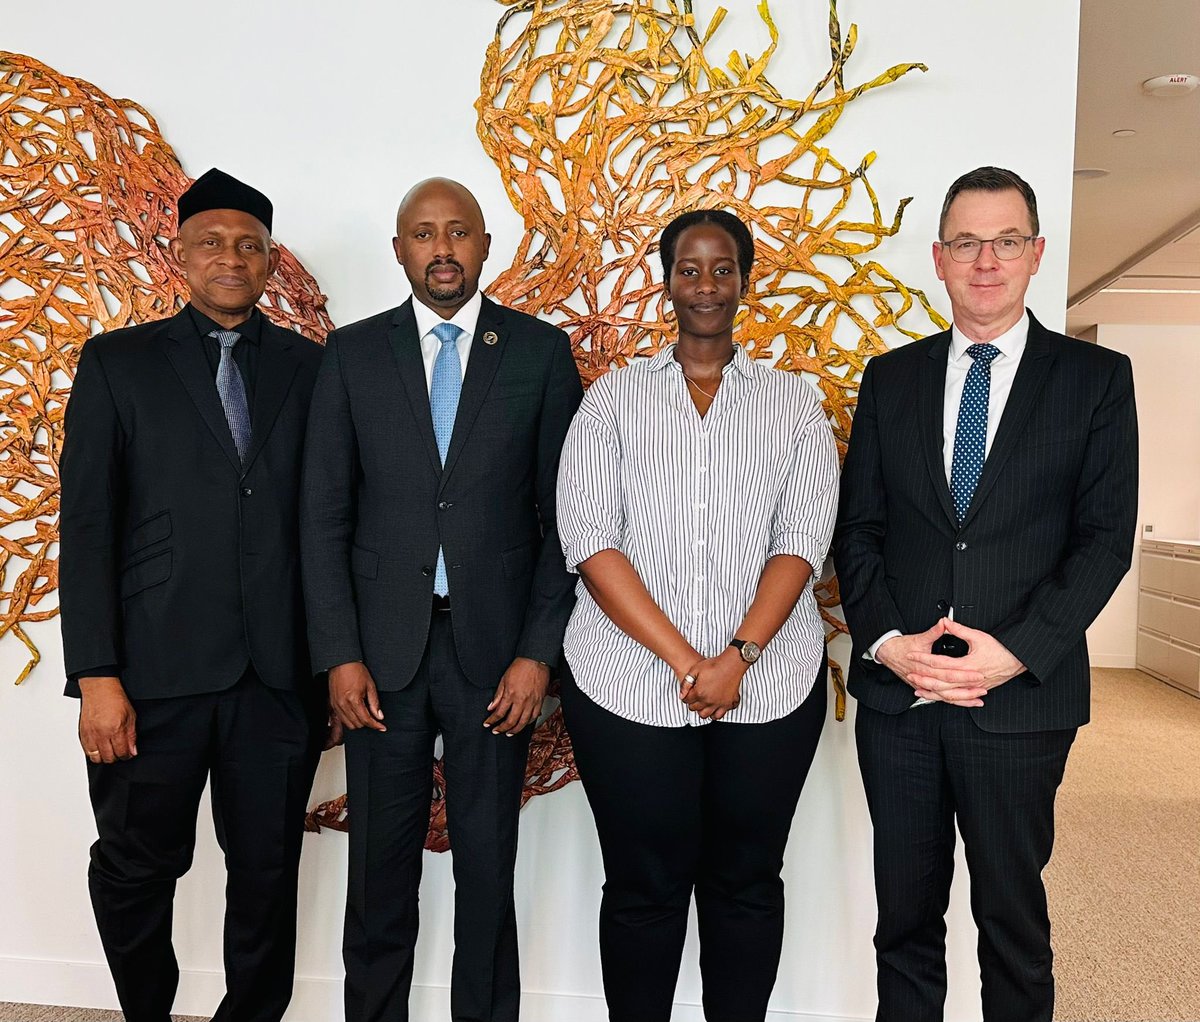 Today, @RwandaInUSA met with IFC Vice President for #Africa @SPimentaIFC and discussed opportunities for the private sector growth and how #Rwanda can tap into these interventions. IFC will be hosting the annual Africa-CEO Forum in #Kigali during the month of May!